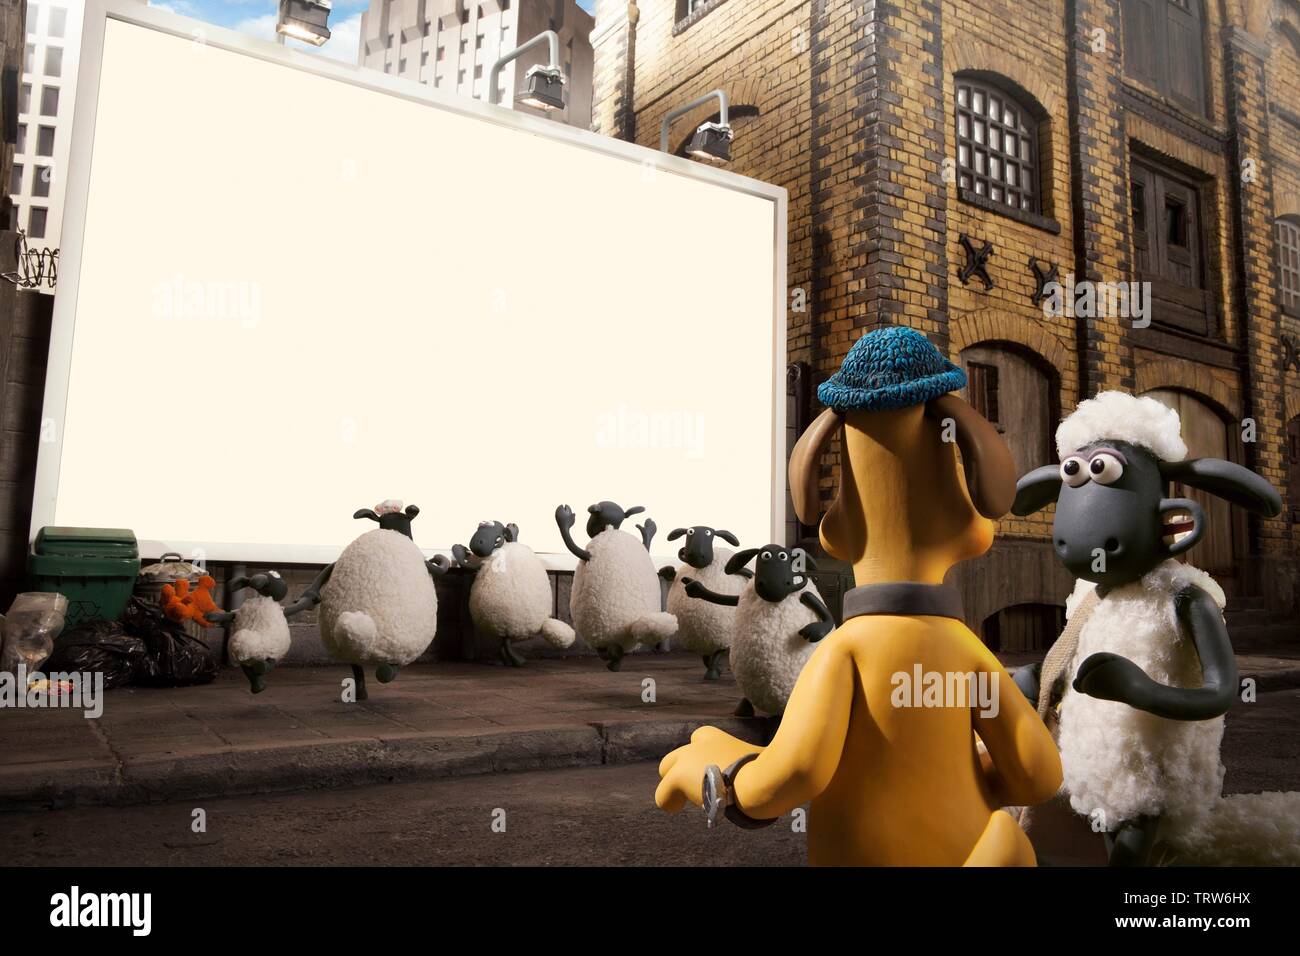 SHAUN THE SHEEP MOVIE (2015). Copyright: Editorial use only. No merchandising or book covers. This is a publicly distributed handout. Access rights only, no license of copyright provided. Only to be reproduced in conjunction with promotion of this film. Credit: AARDMAN ANIMATIONS/ANTON CAPITAL ENTERTAINMENT/STUDIO CANAL / Album Stock Photo